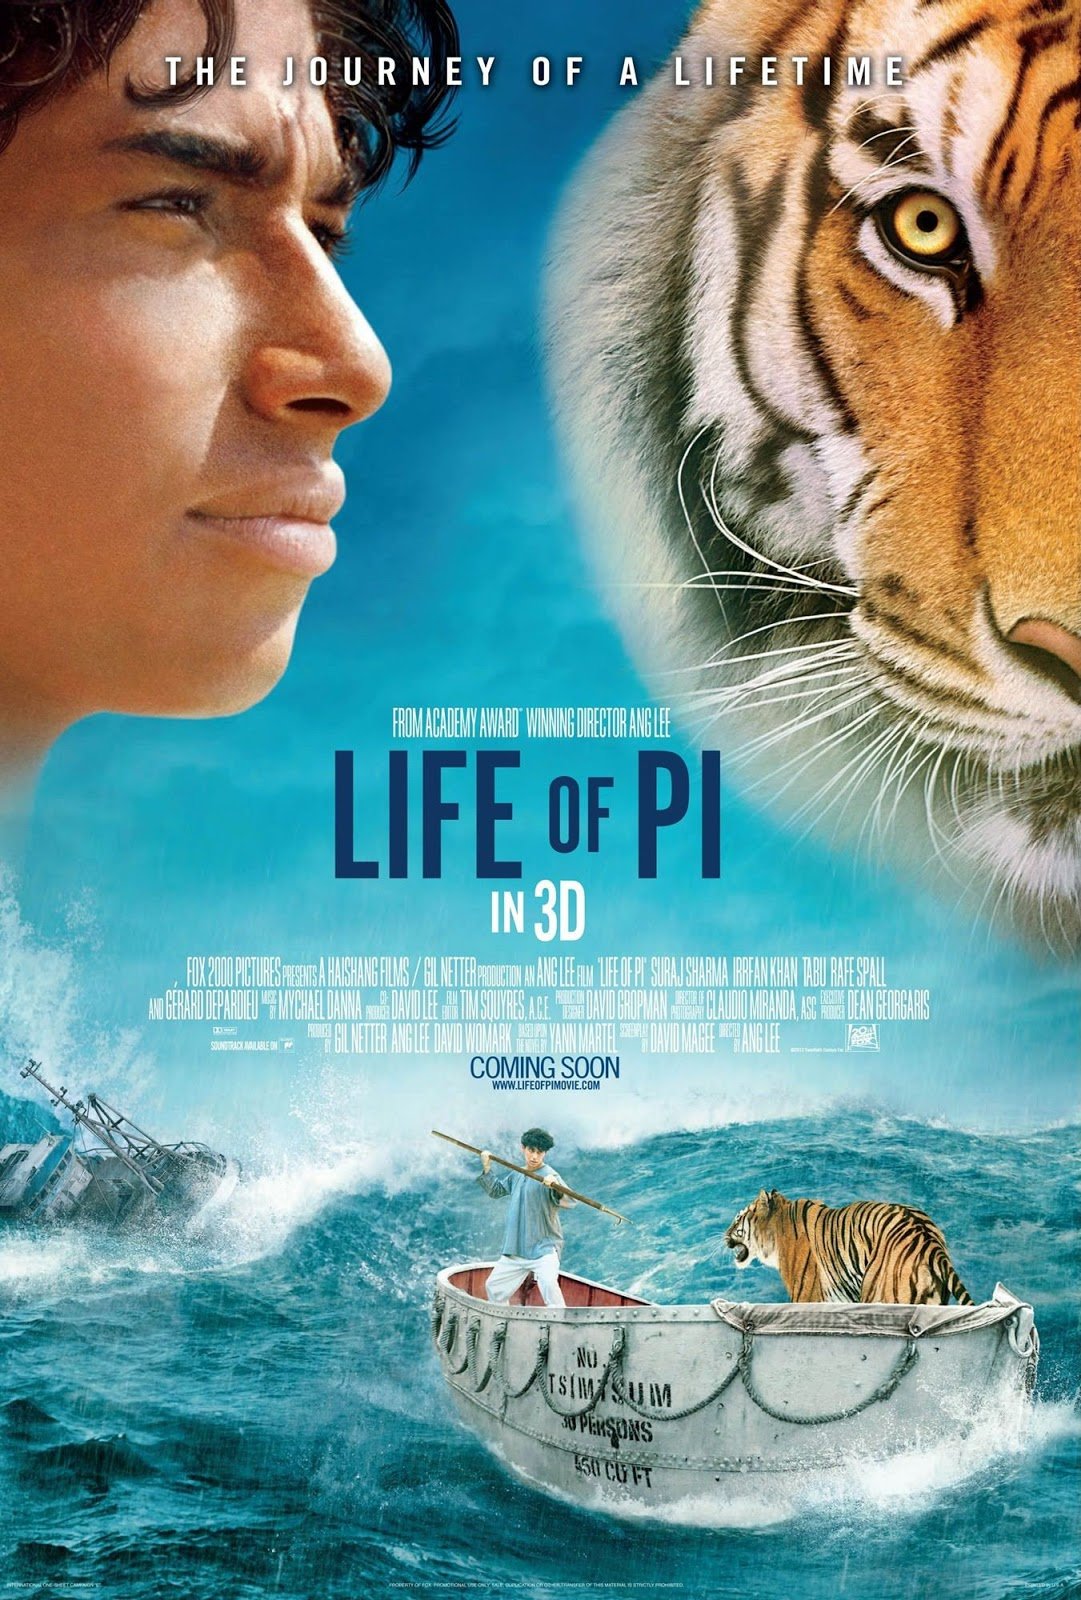 http://www.hacerselacritica.com/wp-content/uploads/2013/01/life-of-pi-poster1.jpg